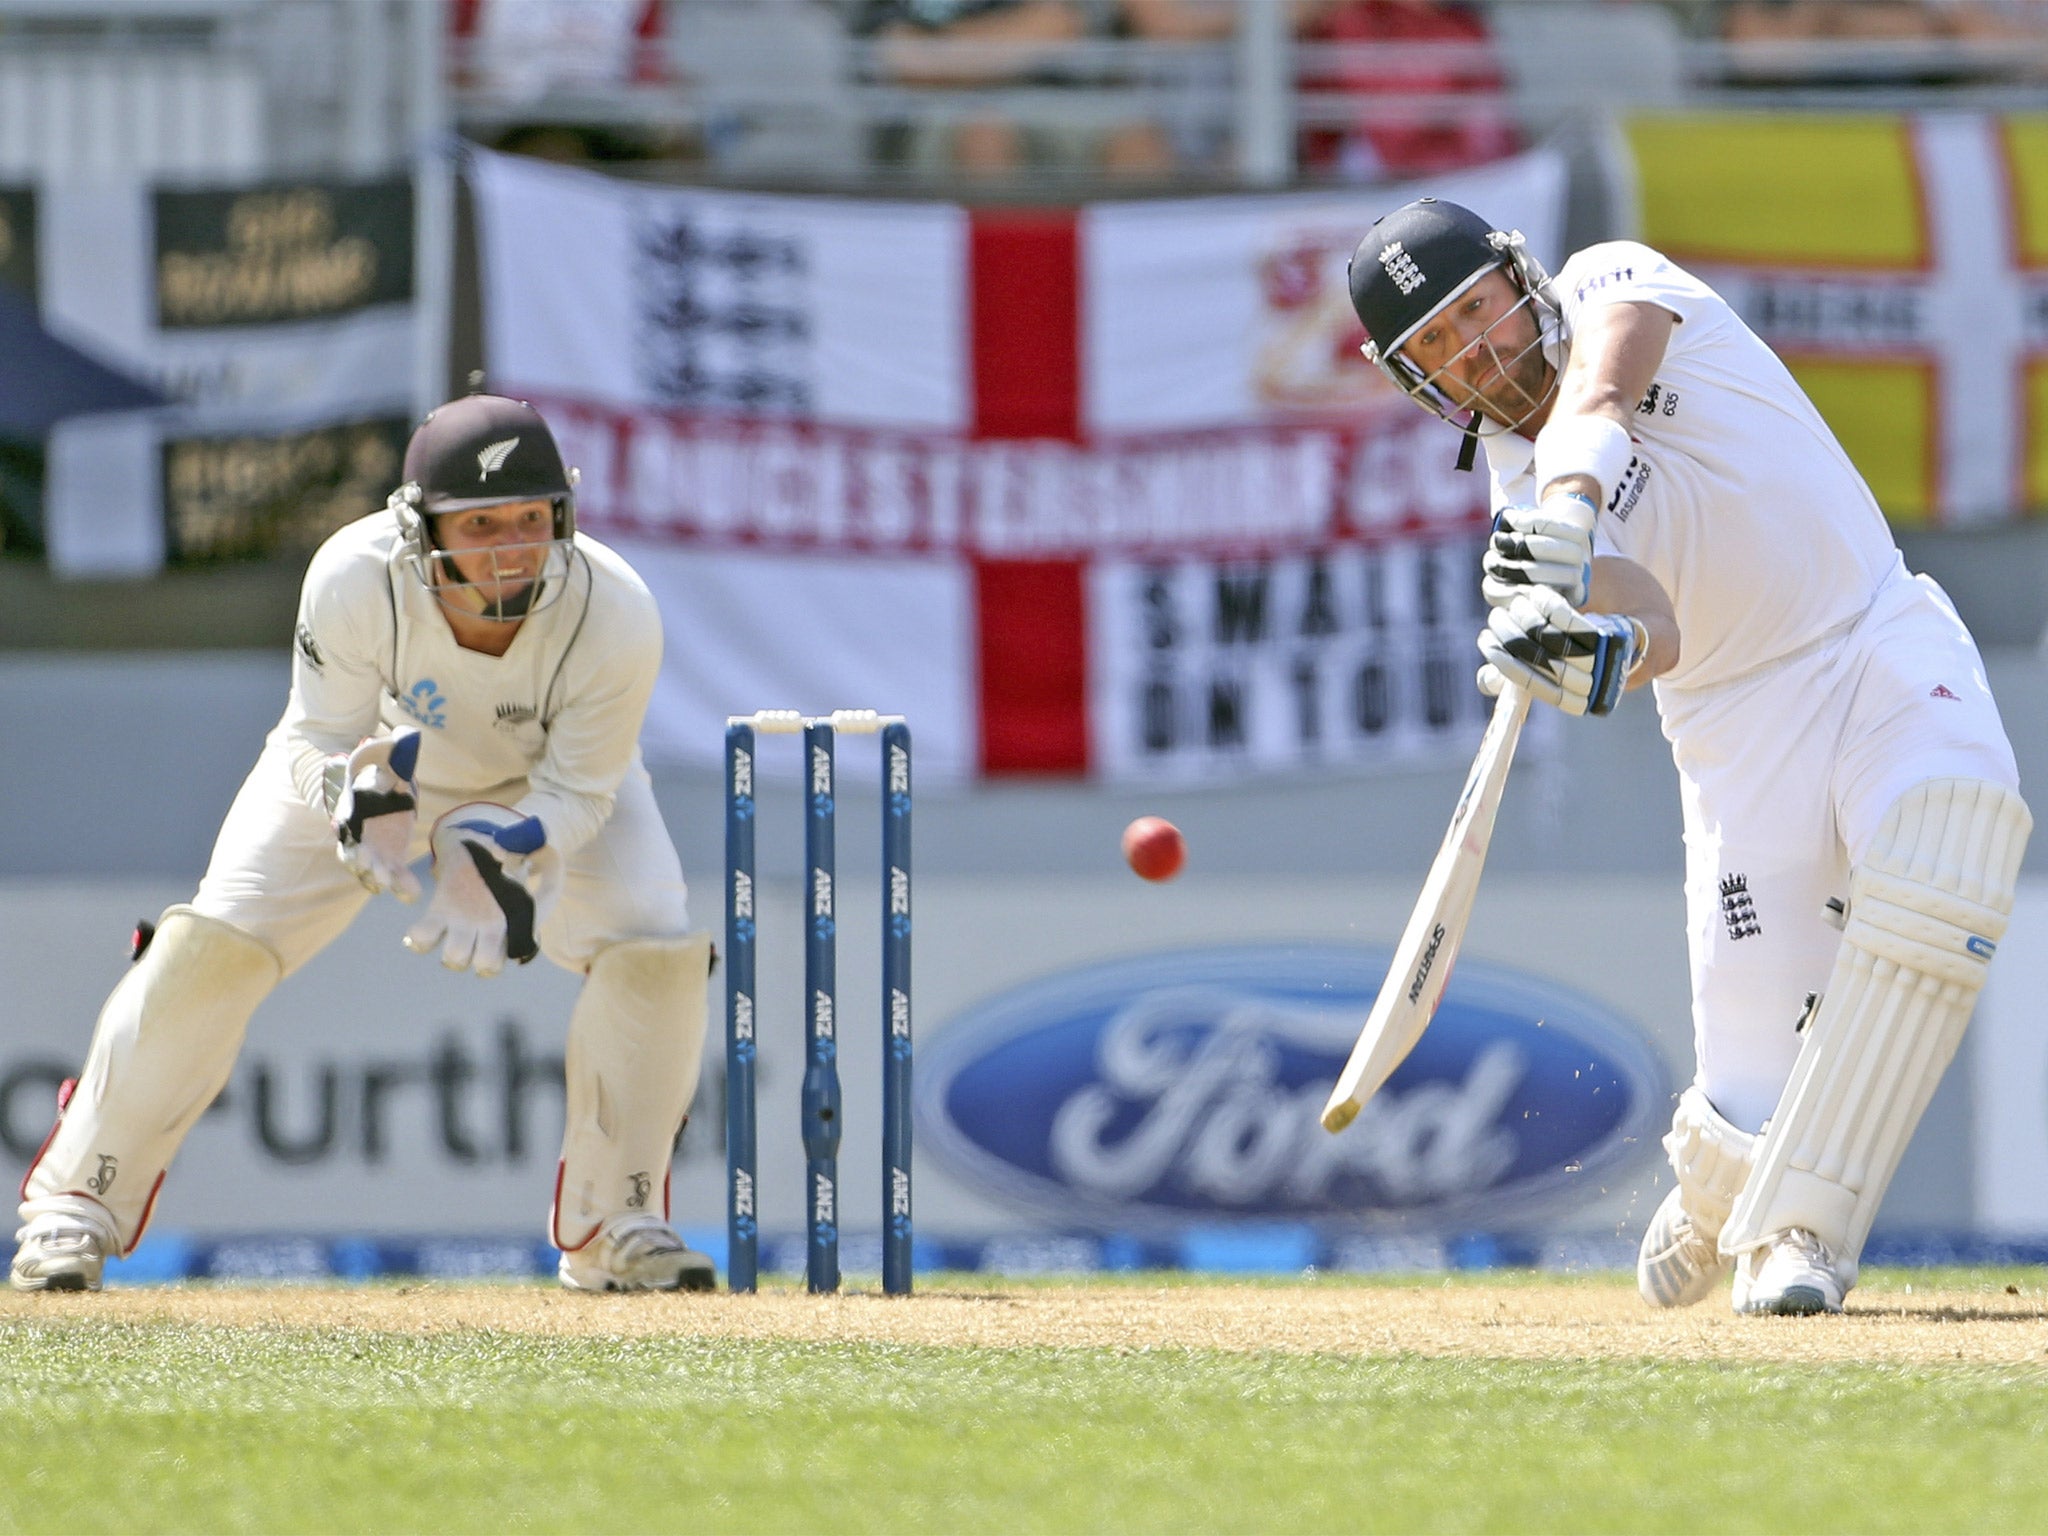 Matt Prior on the attack in the third Test against New Zealand in March